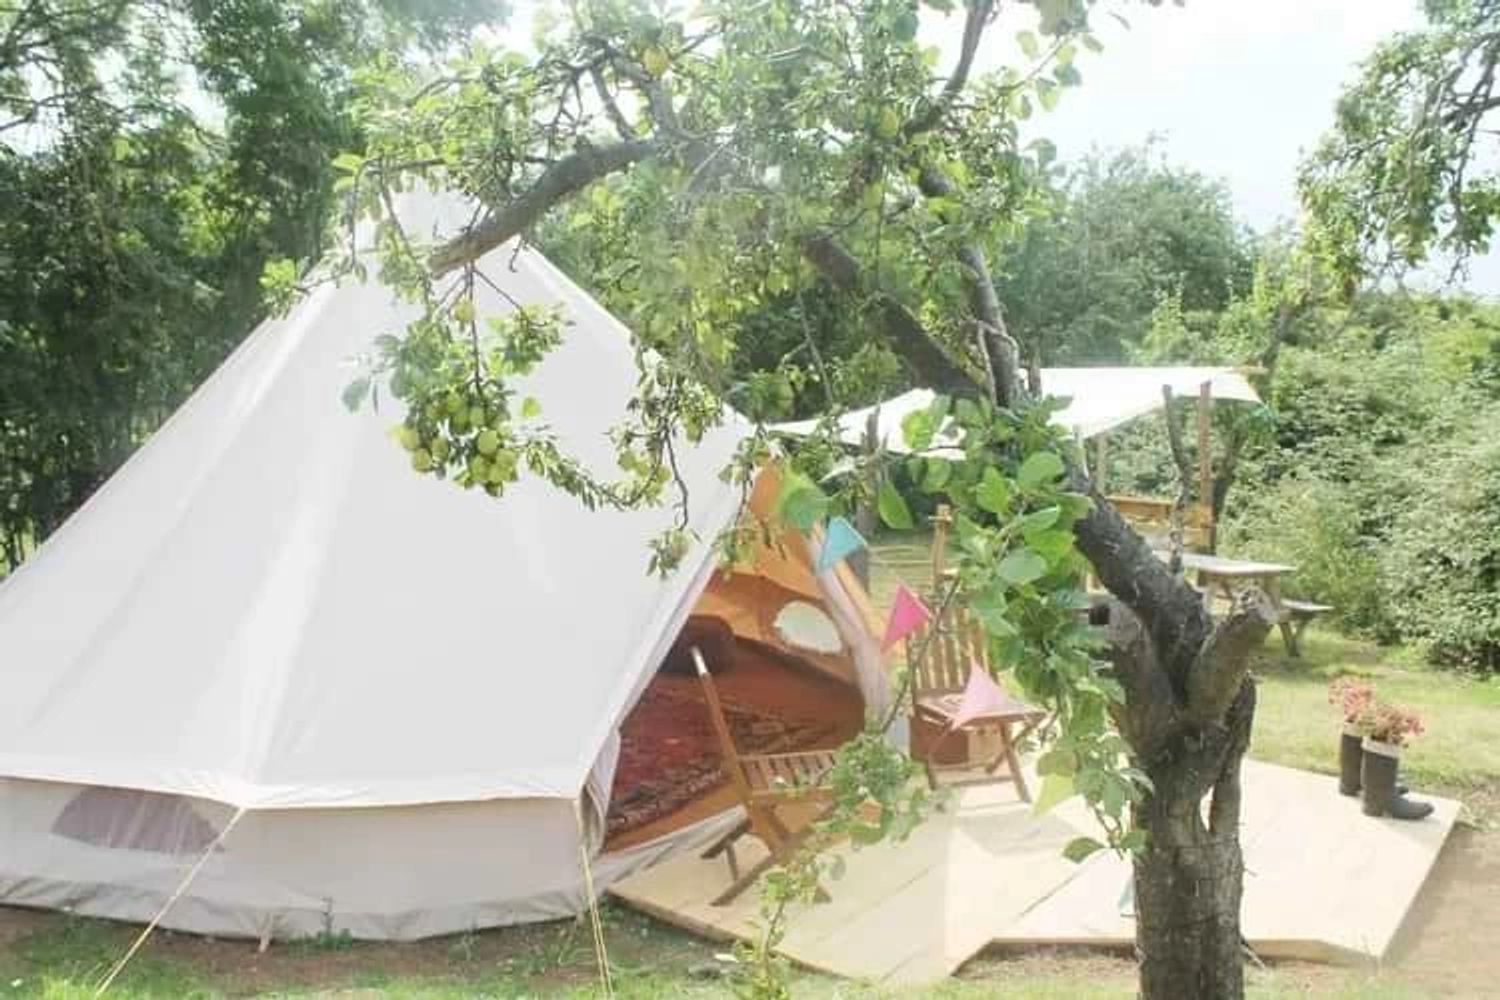 Egg plum bell tent with flowers